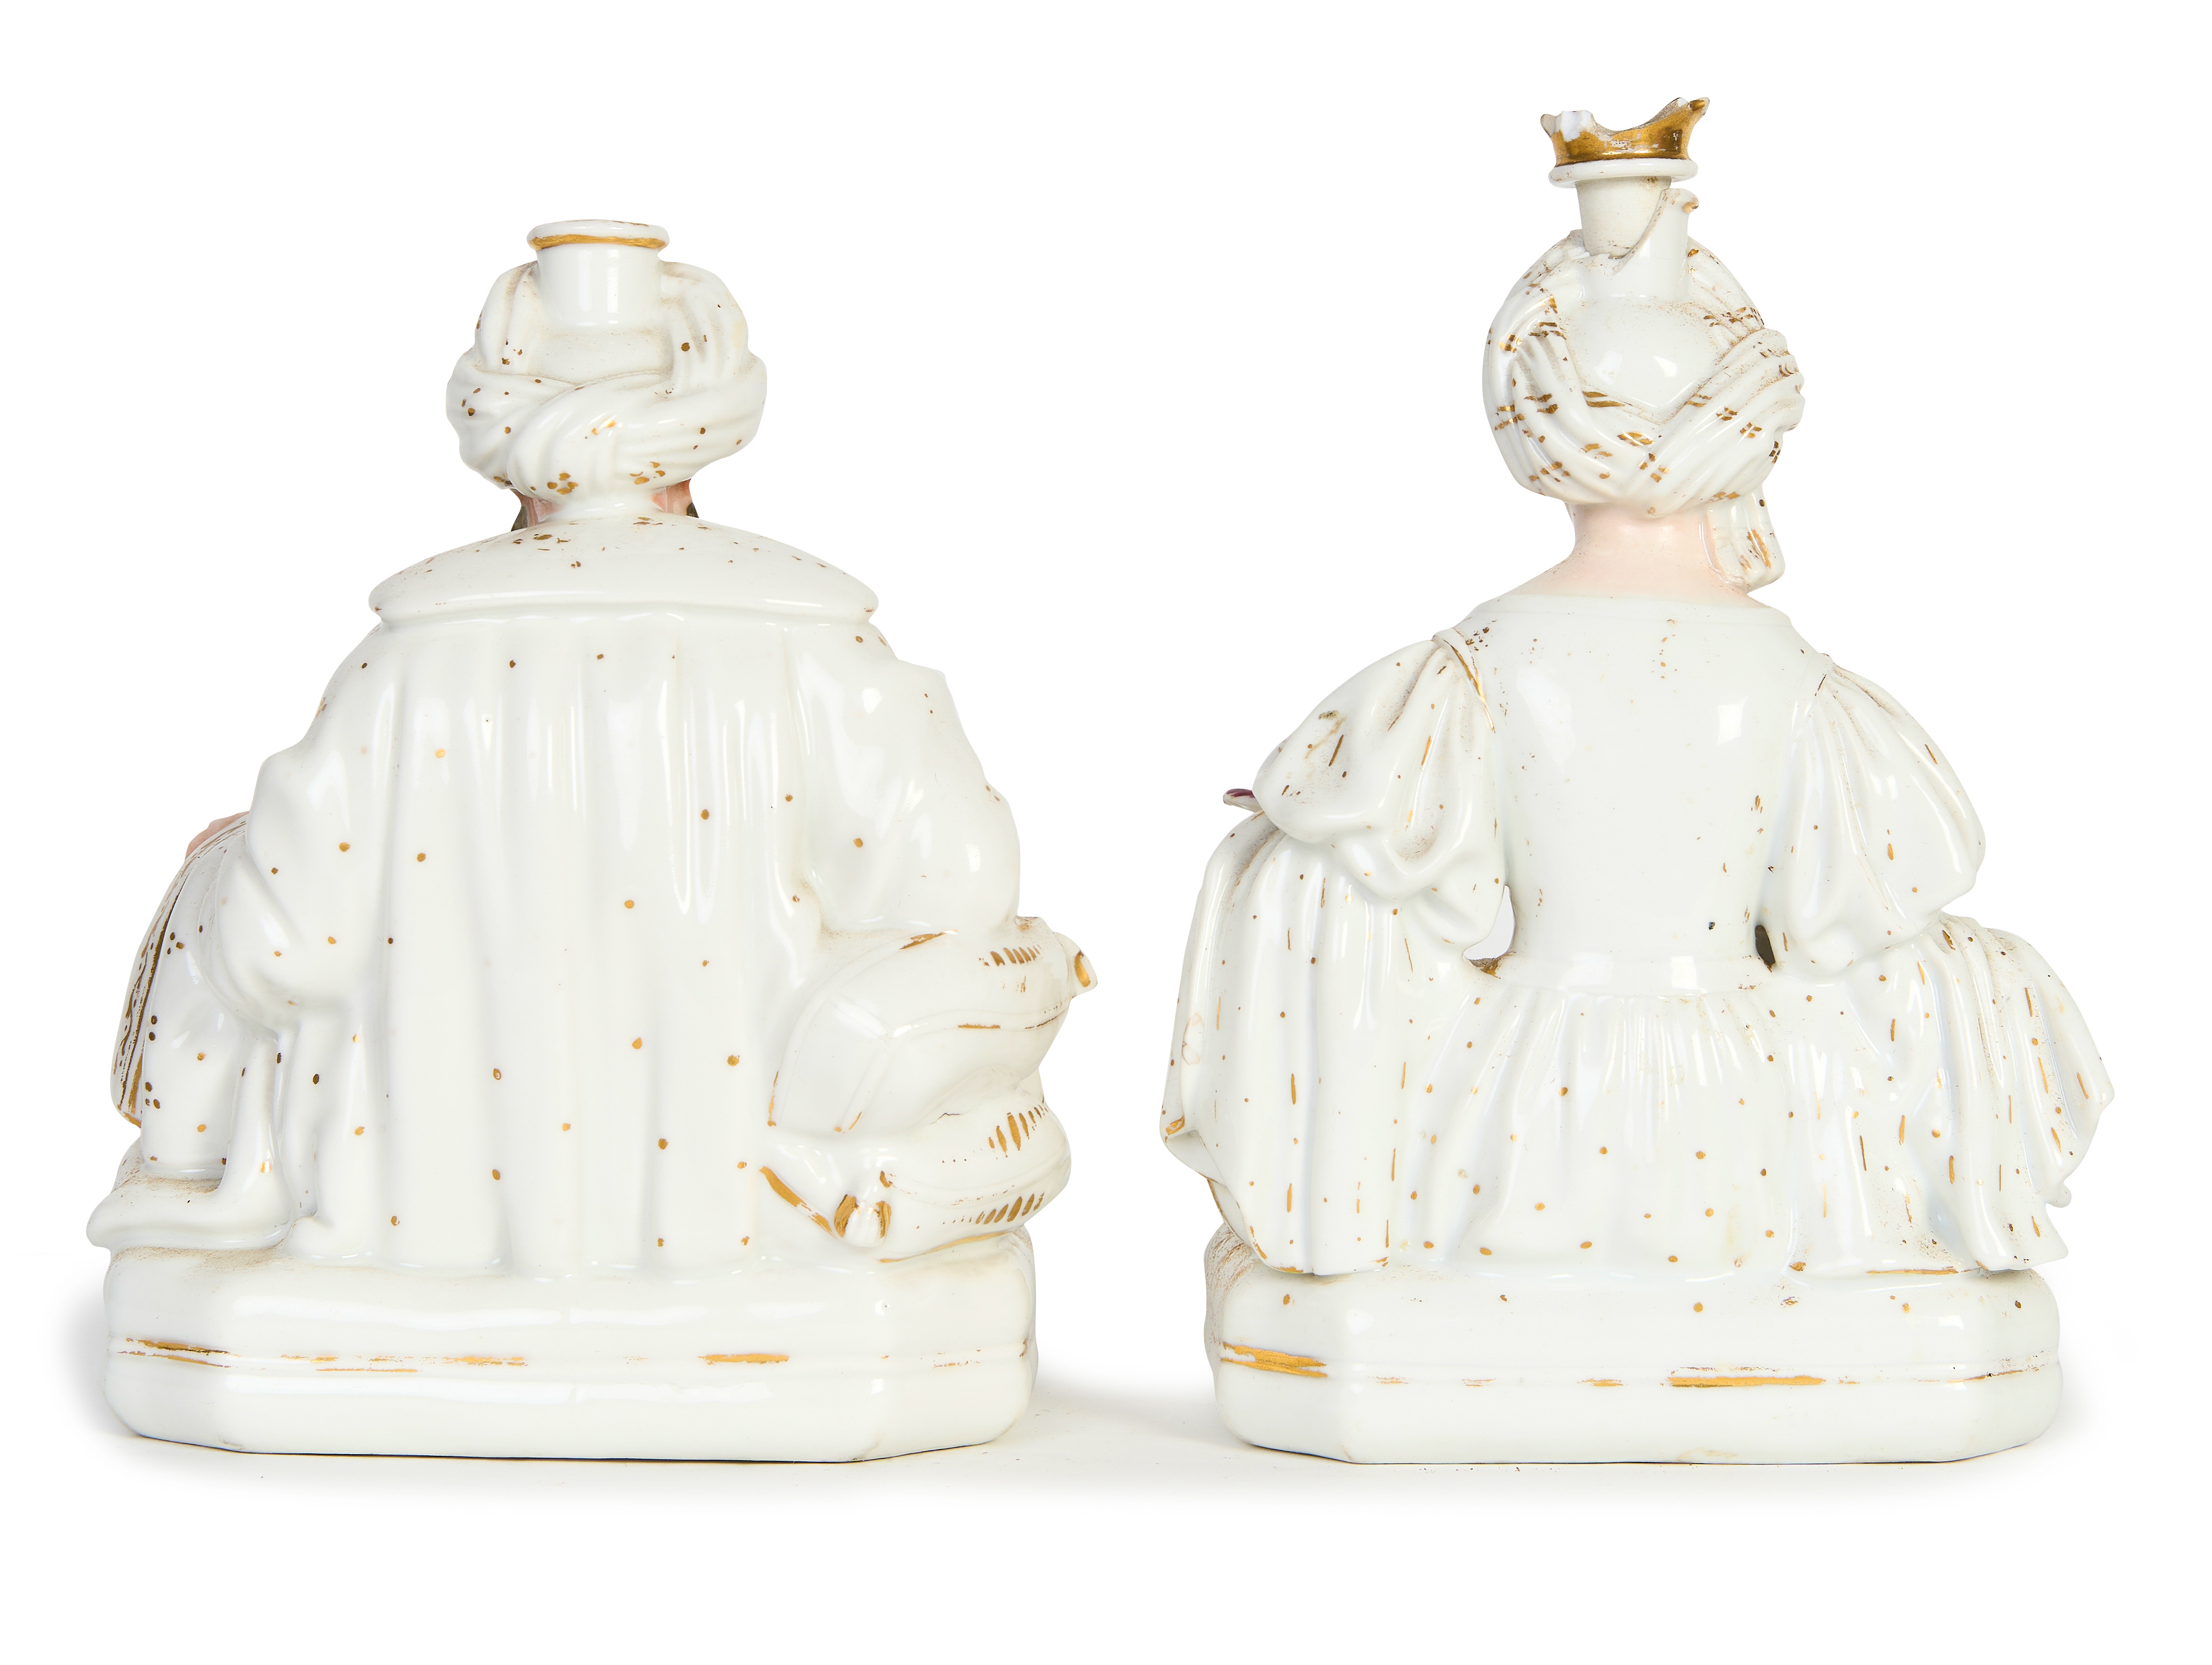 A PAIR OF SEATED SULTAN & SULTANA FIGURINES, JACOB PETIT, 19TH CENTURY FRANCE - Image 3 of 4